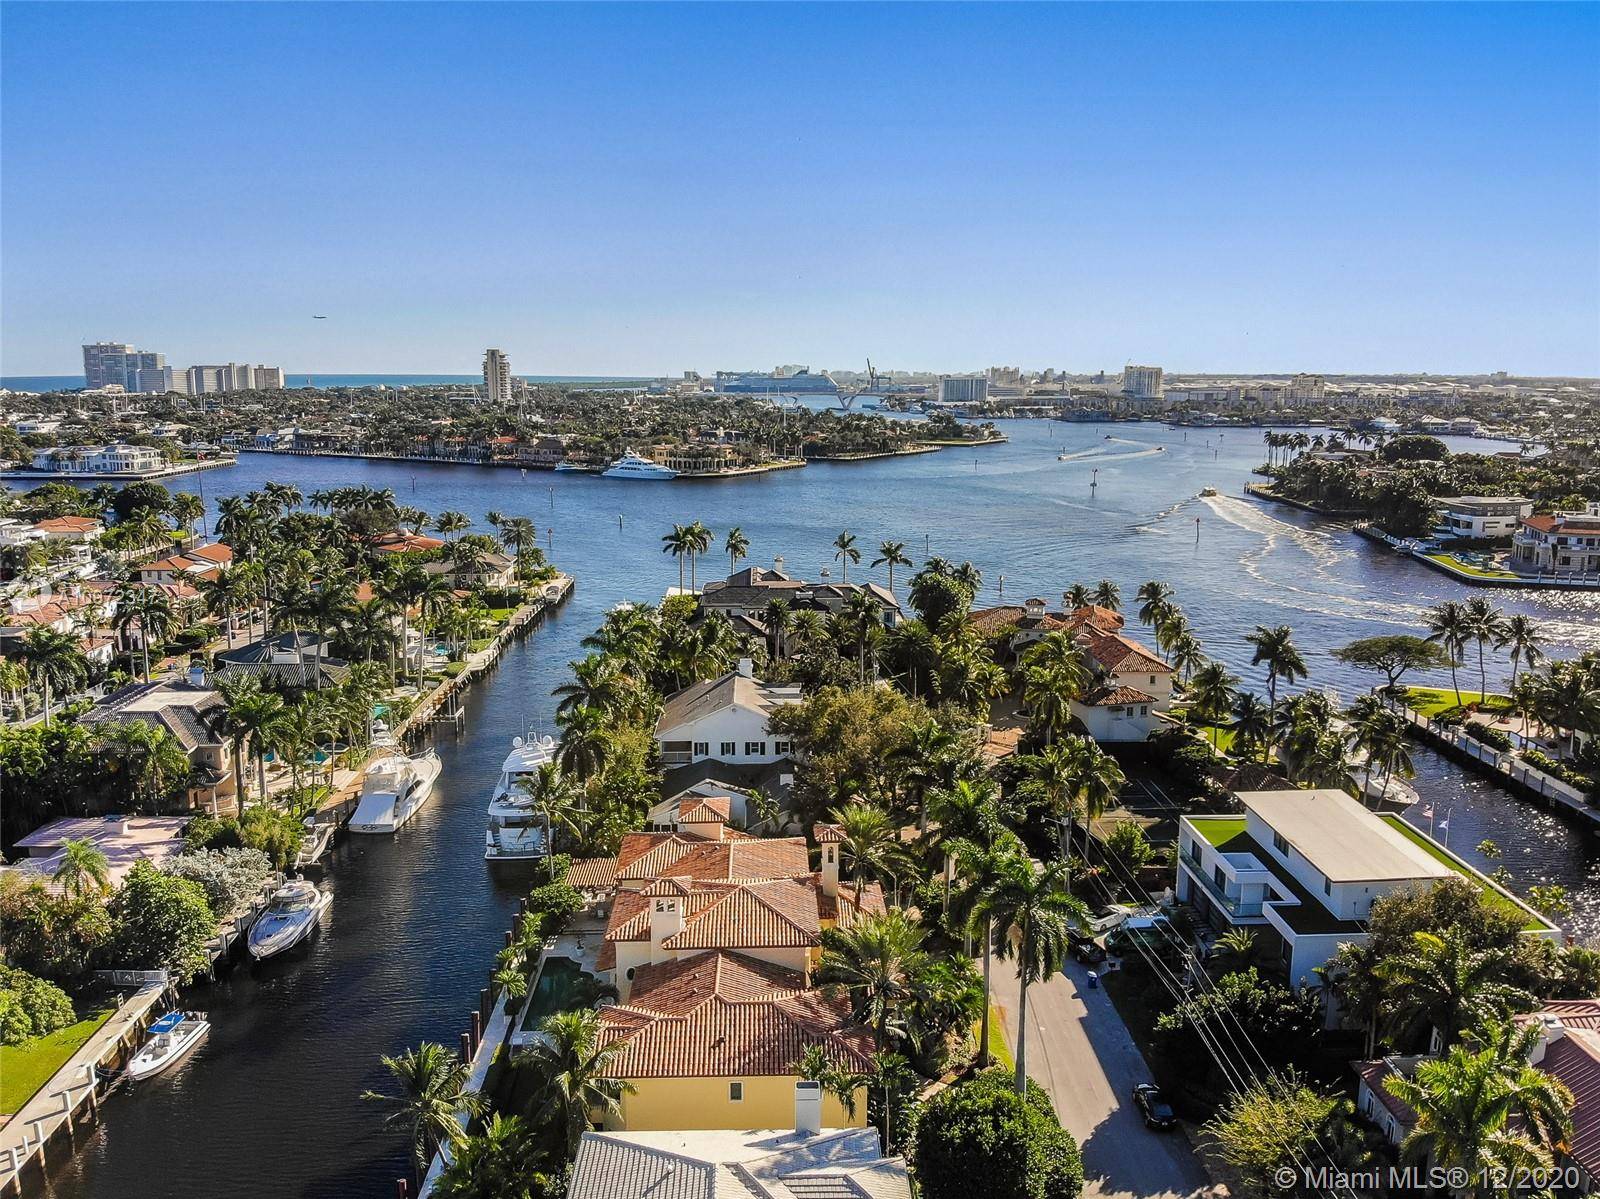 This stunning property is in the finest Las Olas area and consists of 6 beds, 7 and a half baths.